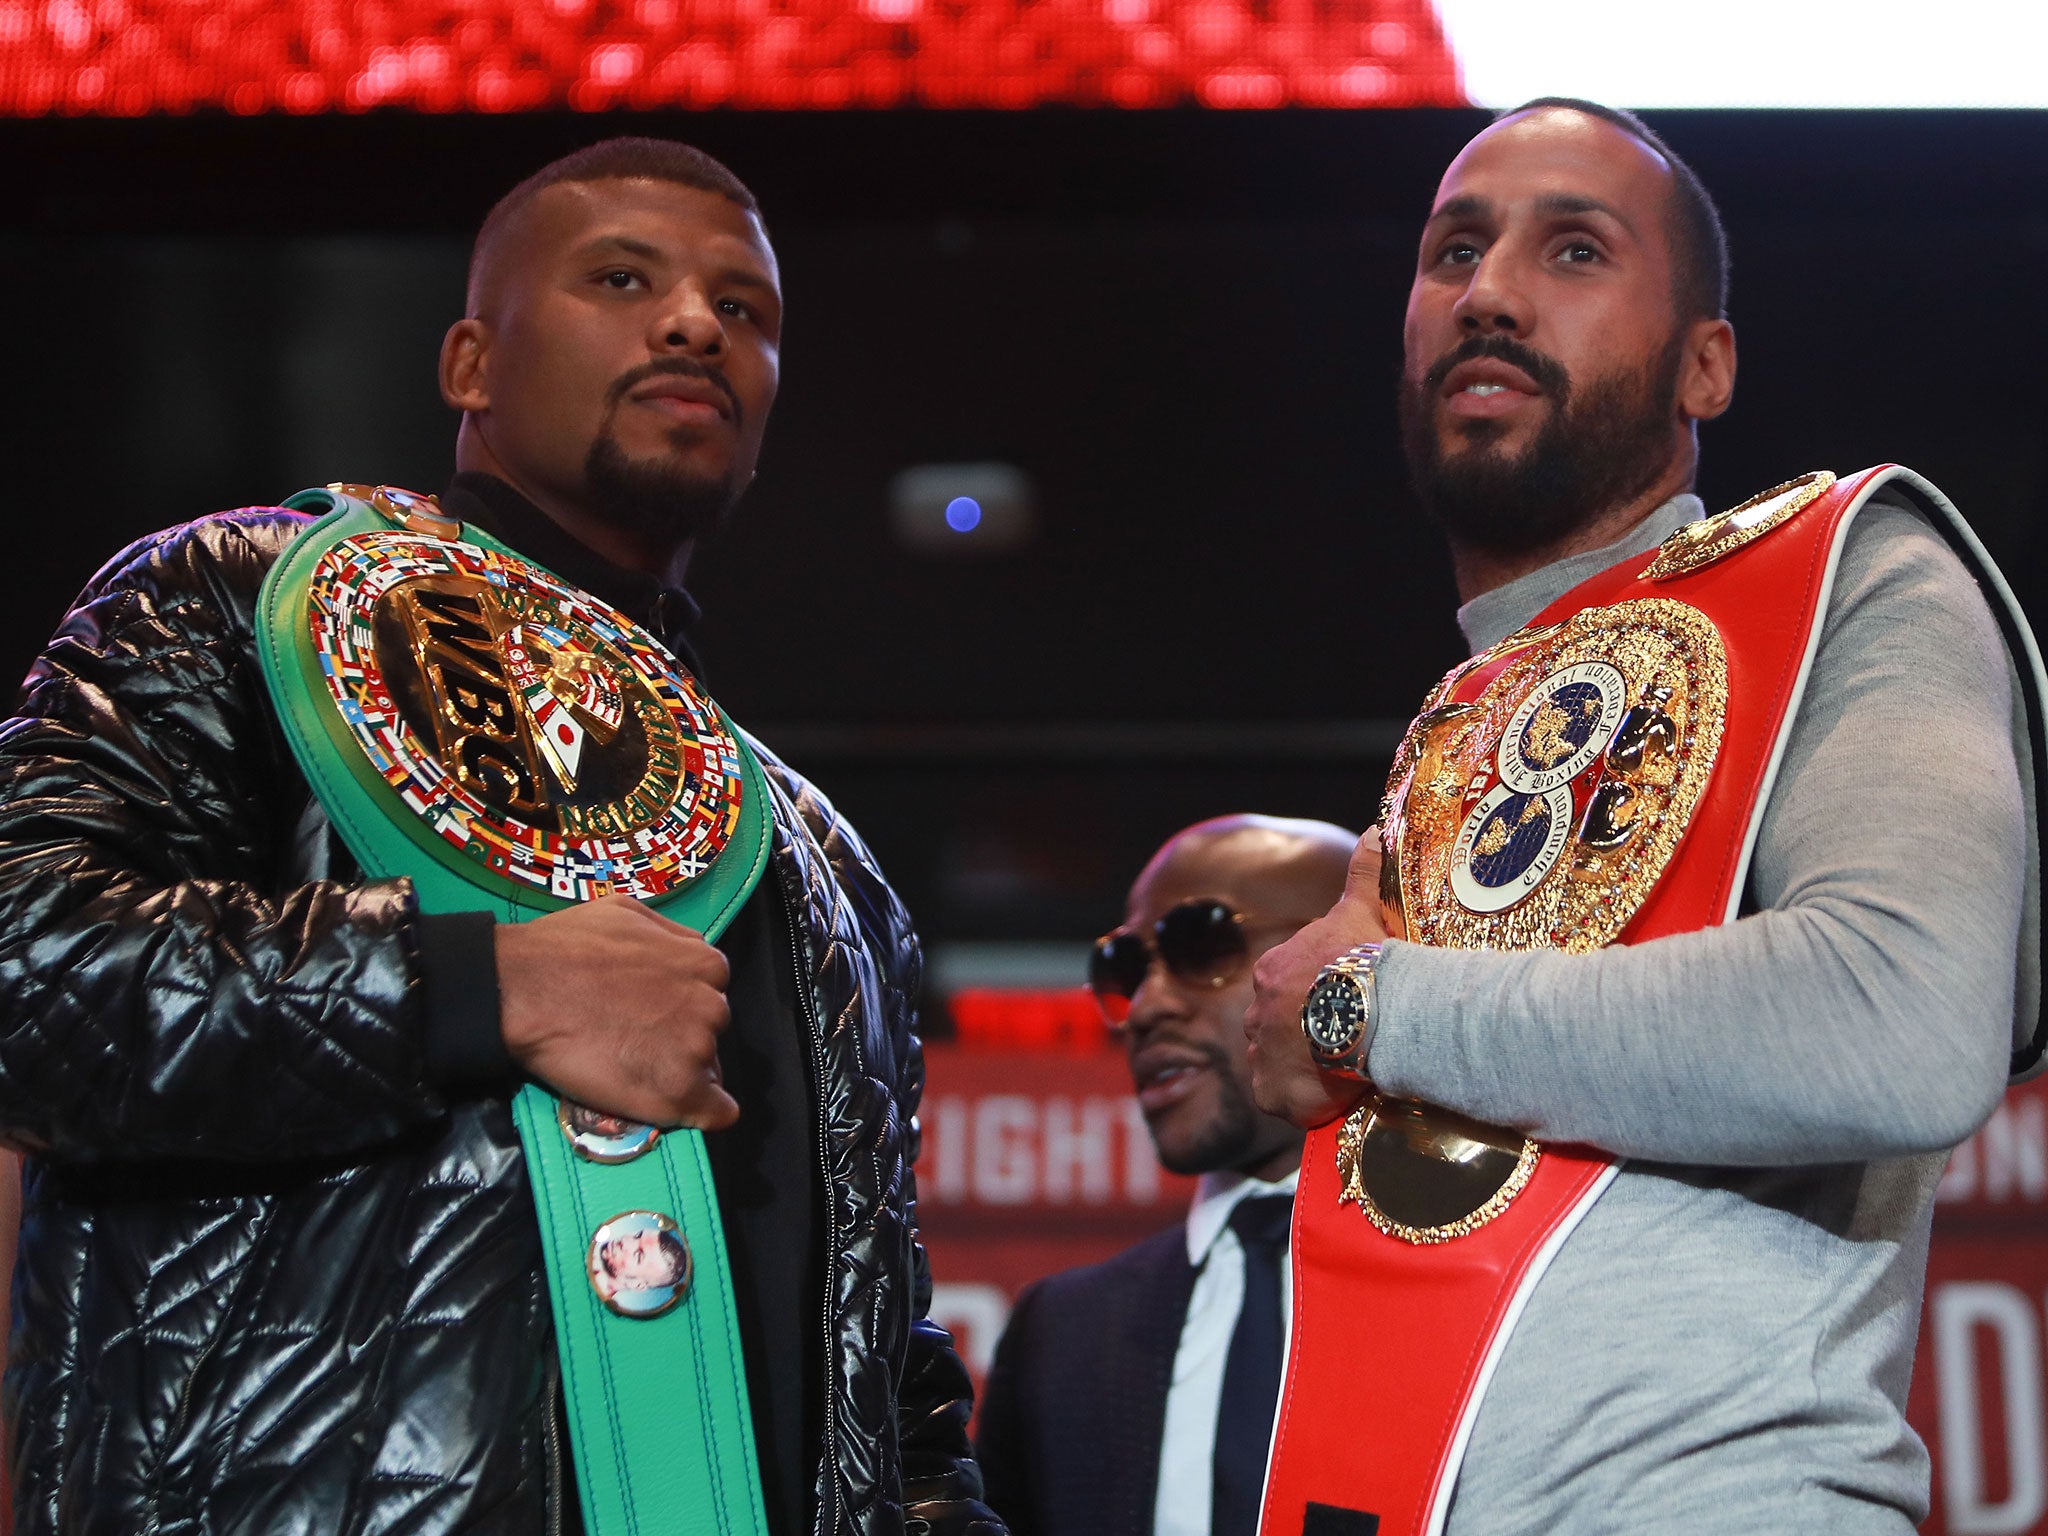 &#13;
The winner of Jack (left) and DeGale (right) will claim the IBF and WBC super-middleweight titles &#13;